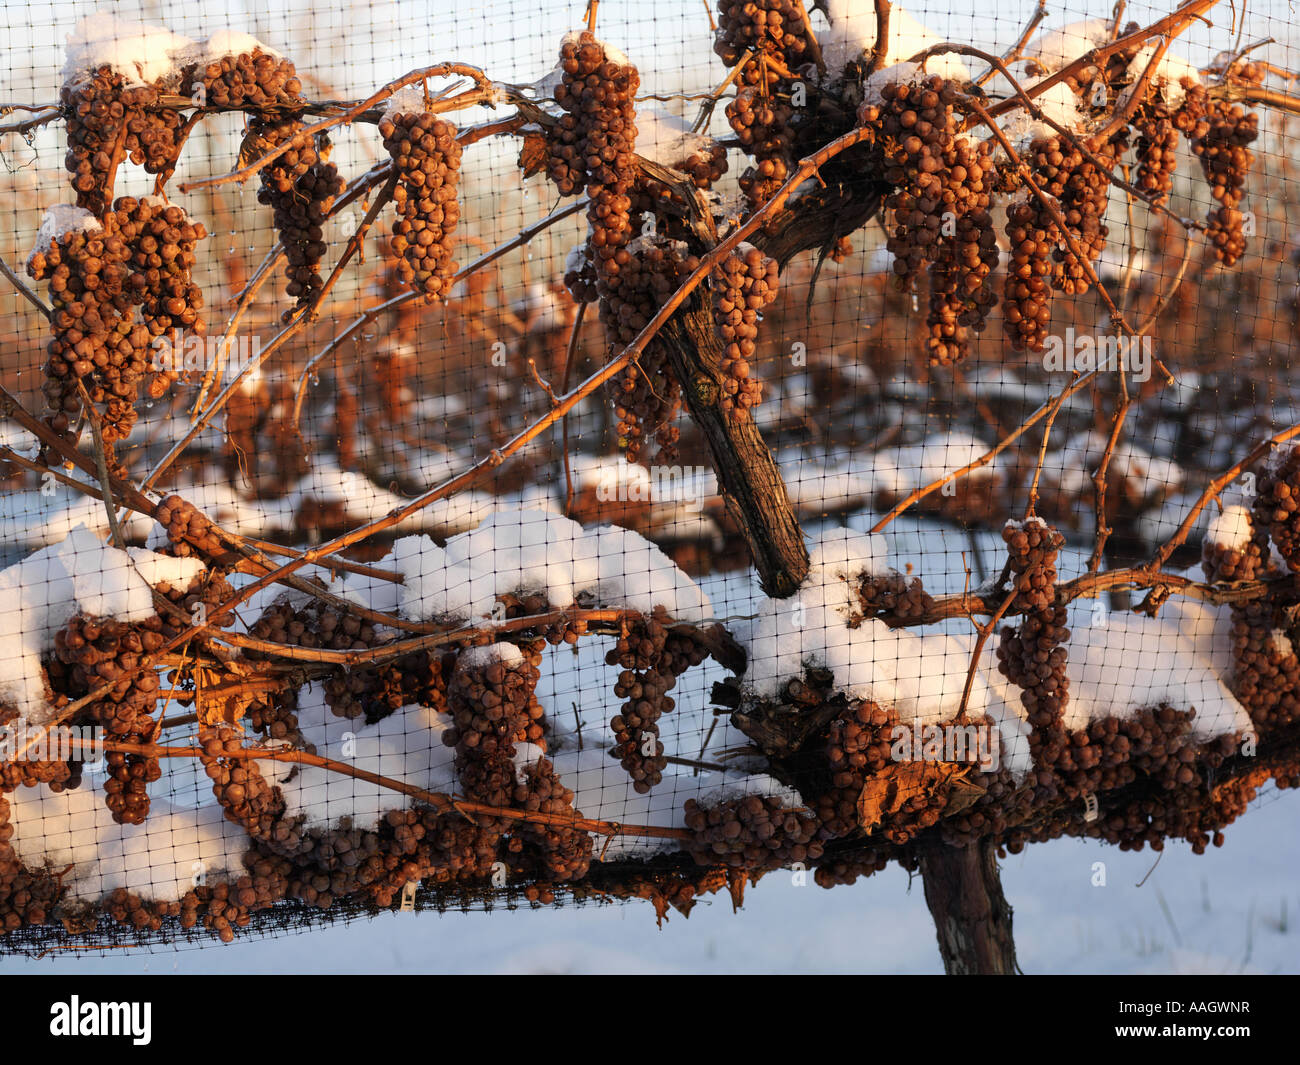 Canada,Ontario,Niagara-on-the-Lake,grapes left on the vine until winter for ice wine harvest Stock Photo